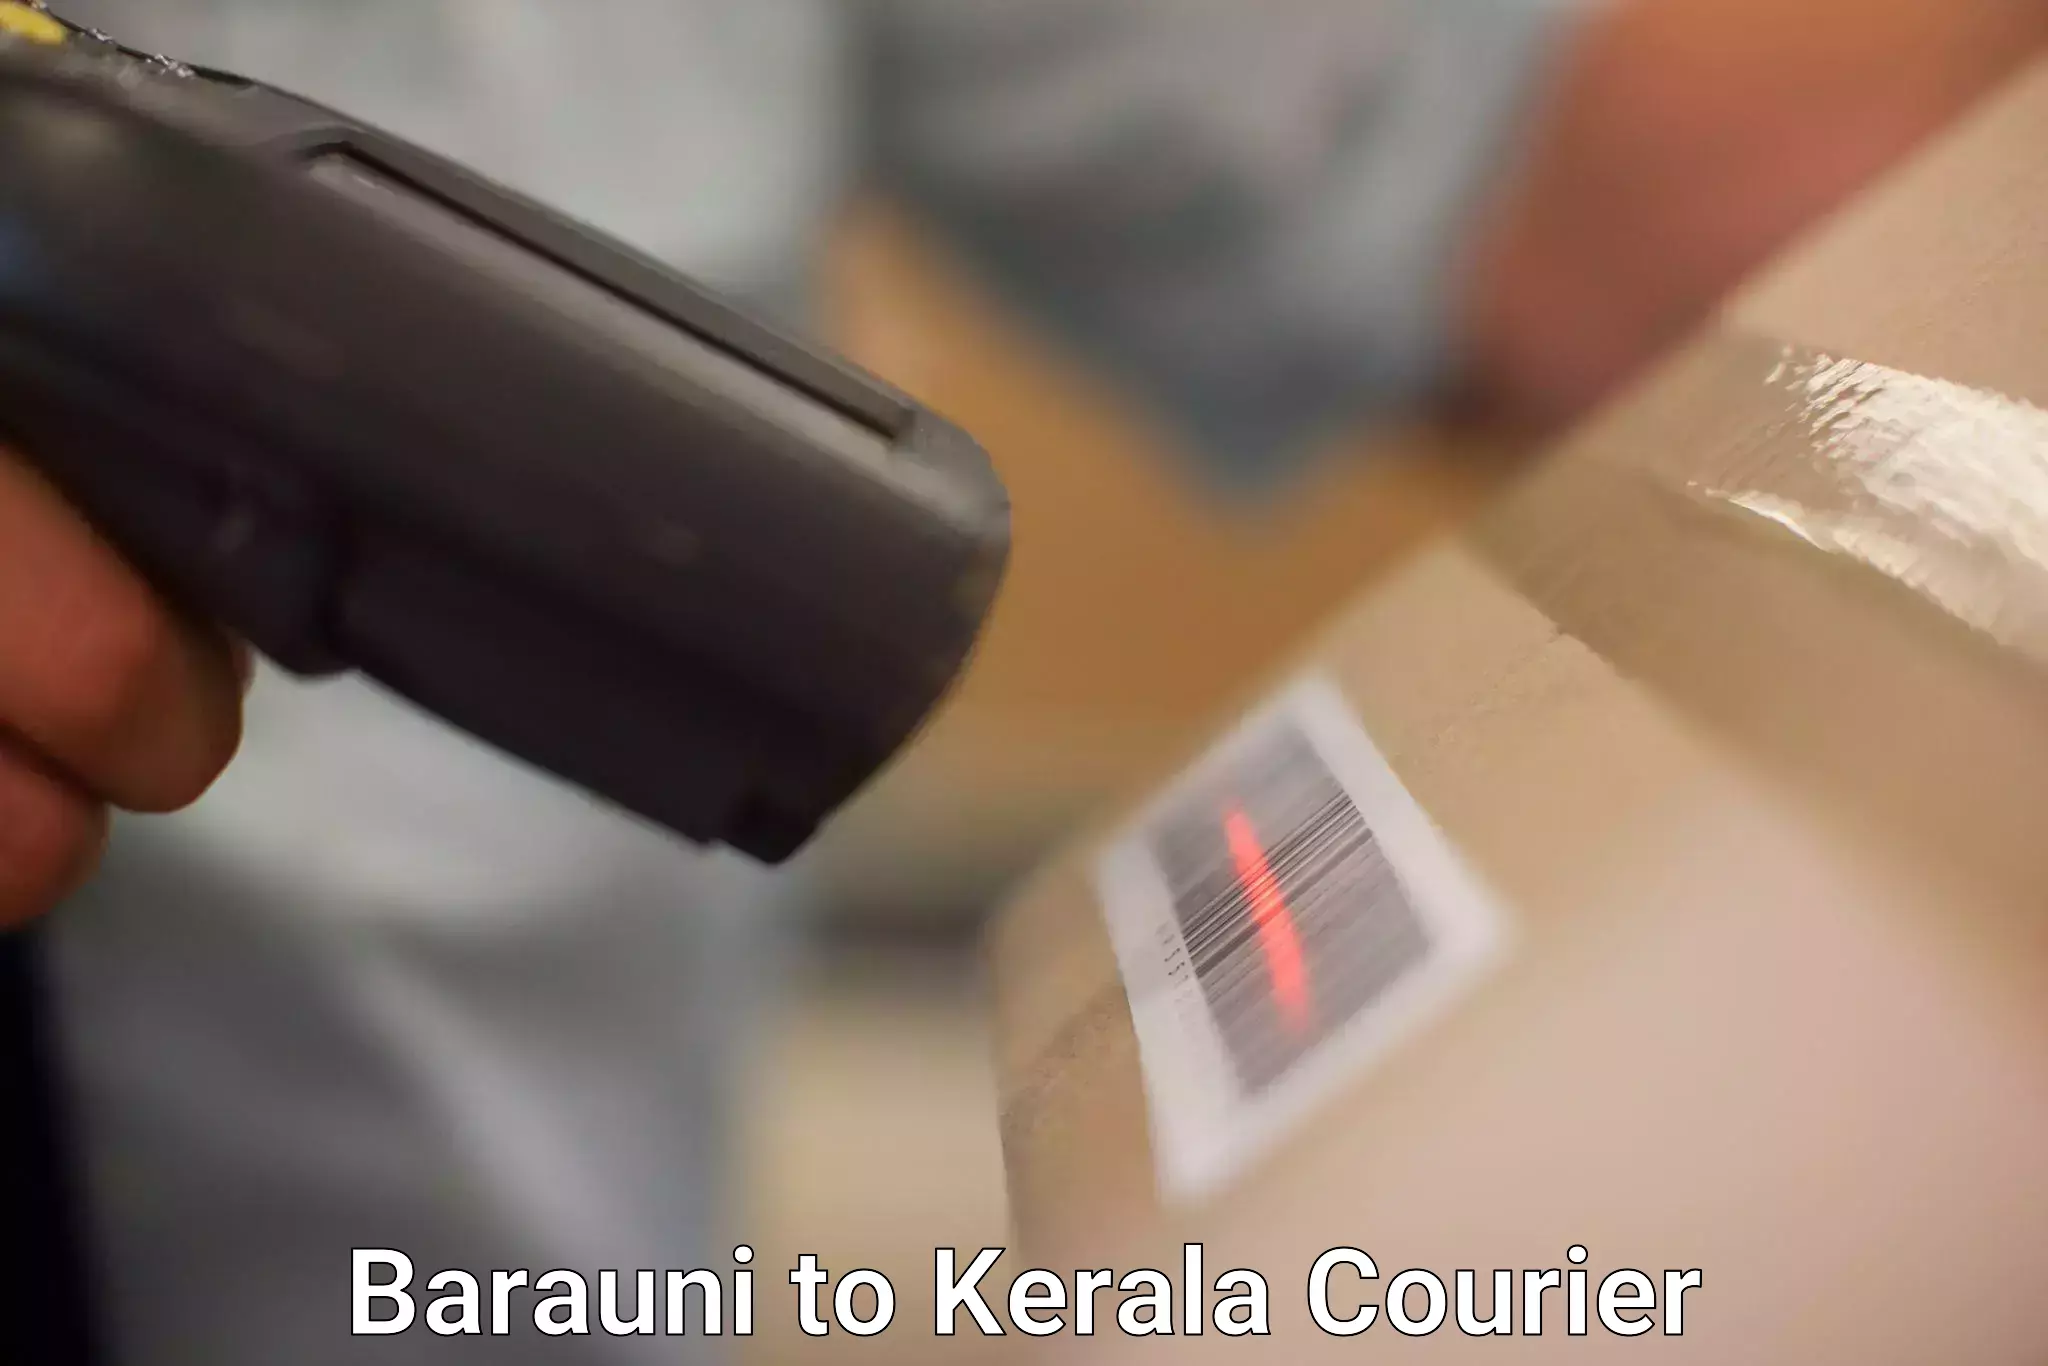 Package delivery network Barauni to Cochin Port Kochi